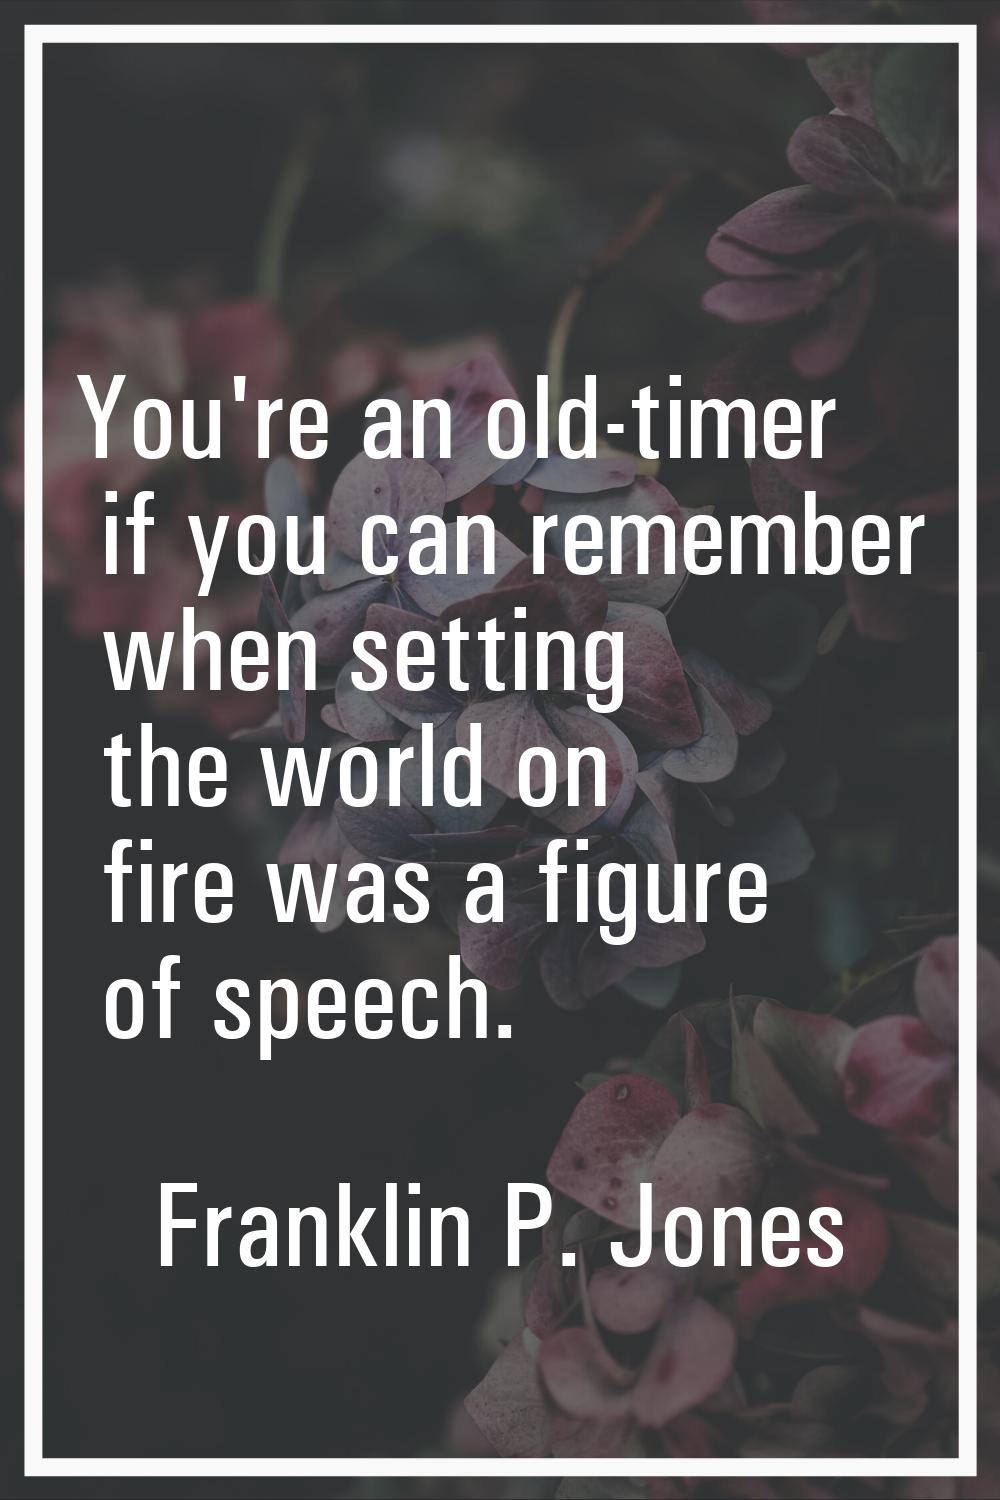 You're an old-timer if you can remember when setting the world on fire was a figure of speech.